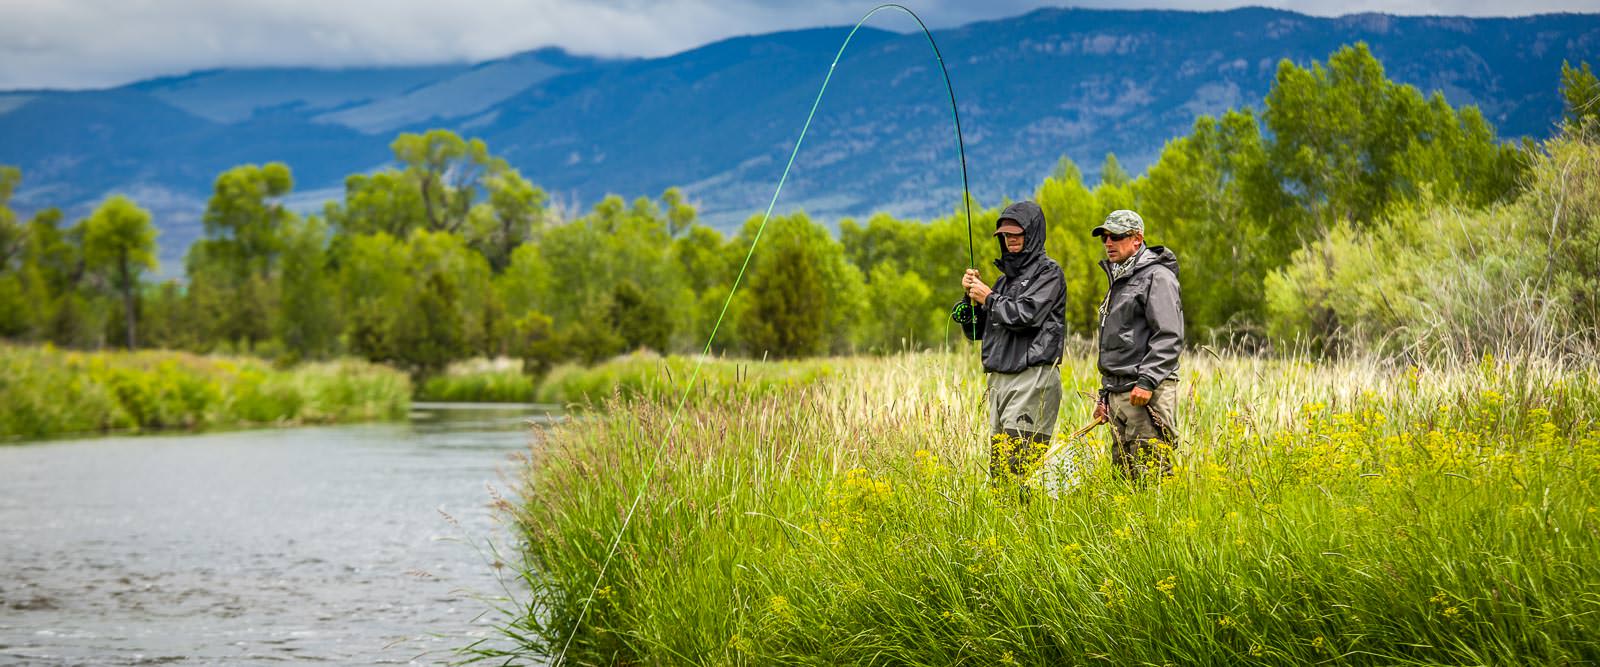 So, you want to be a Fly Fishing Guide? 